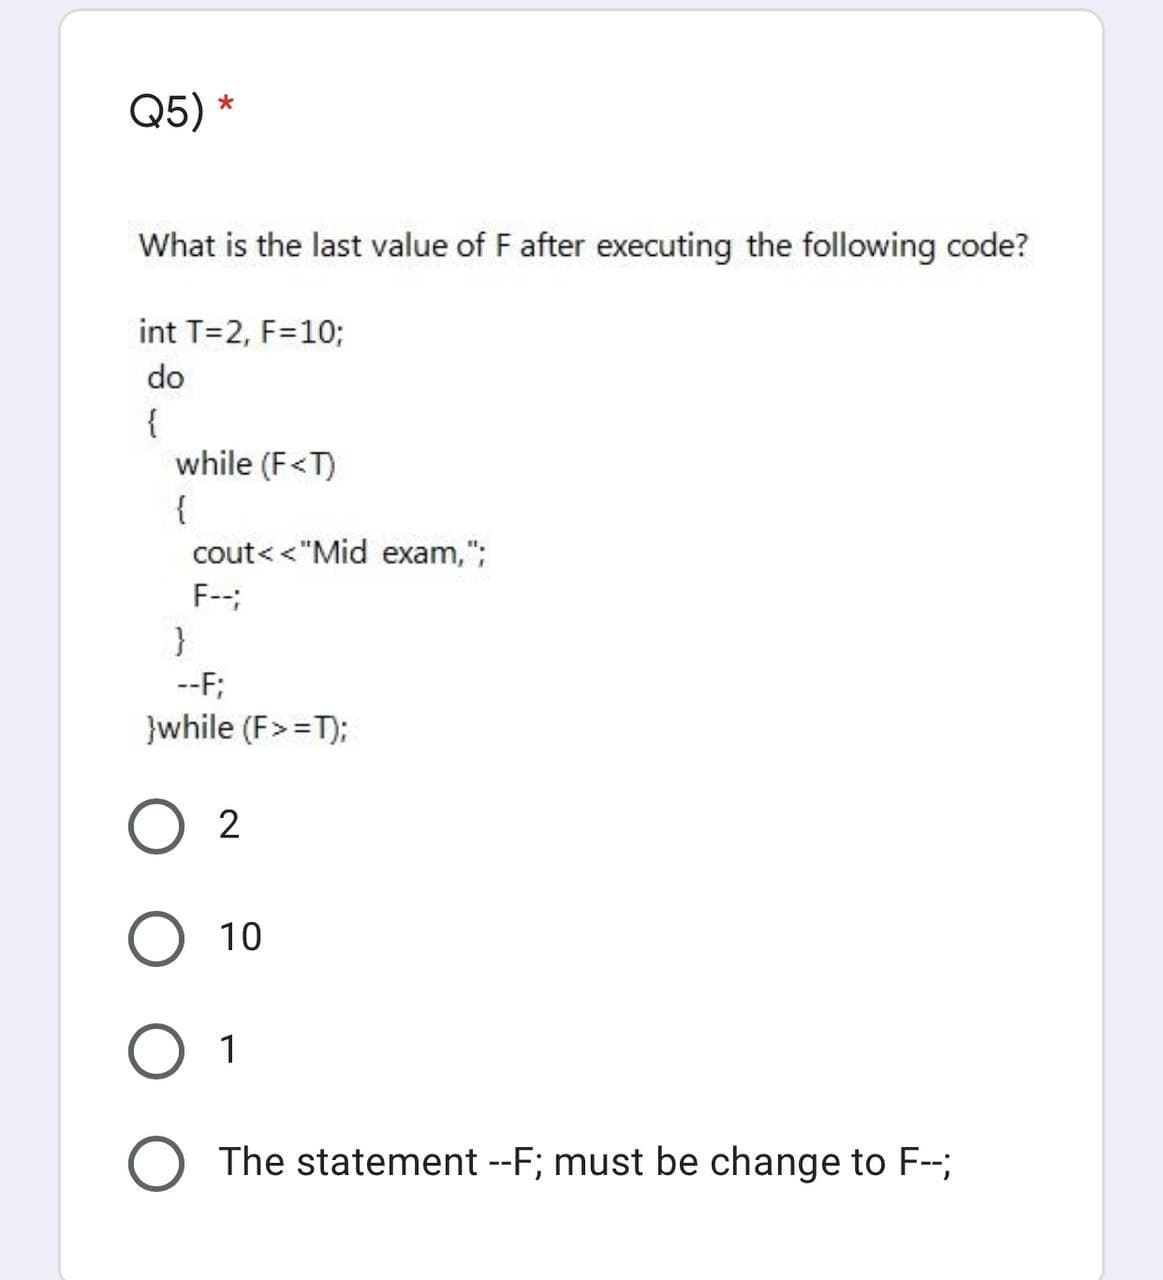 Q5) *
What is the last value of F after executing the following code?
int T=2, F=10;
do
{
while (F<T)
{
cout< <"Mid exam,";
F--;
--F;
}while (F> =T);
O 2
O 10
О 1
O The statement --F; must be change to F-;
